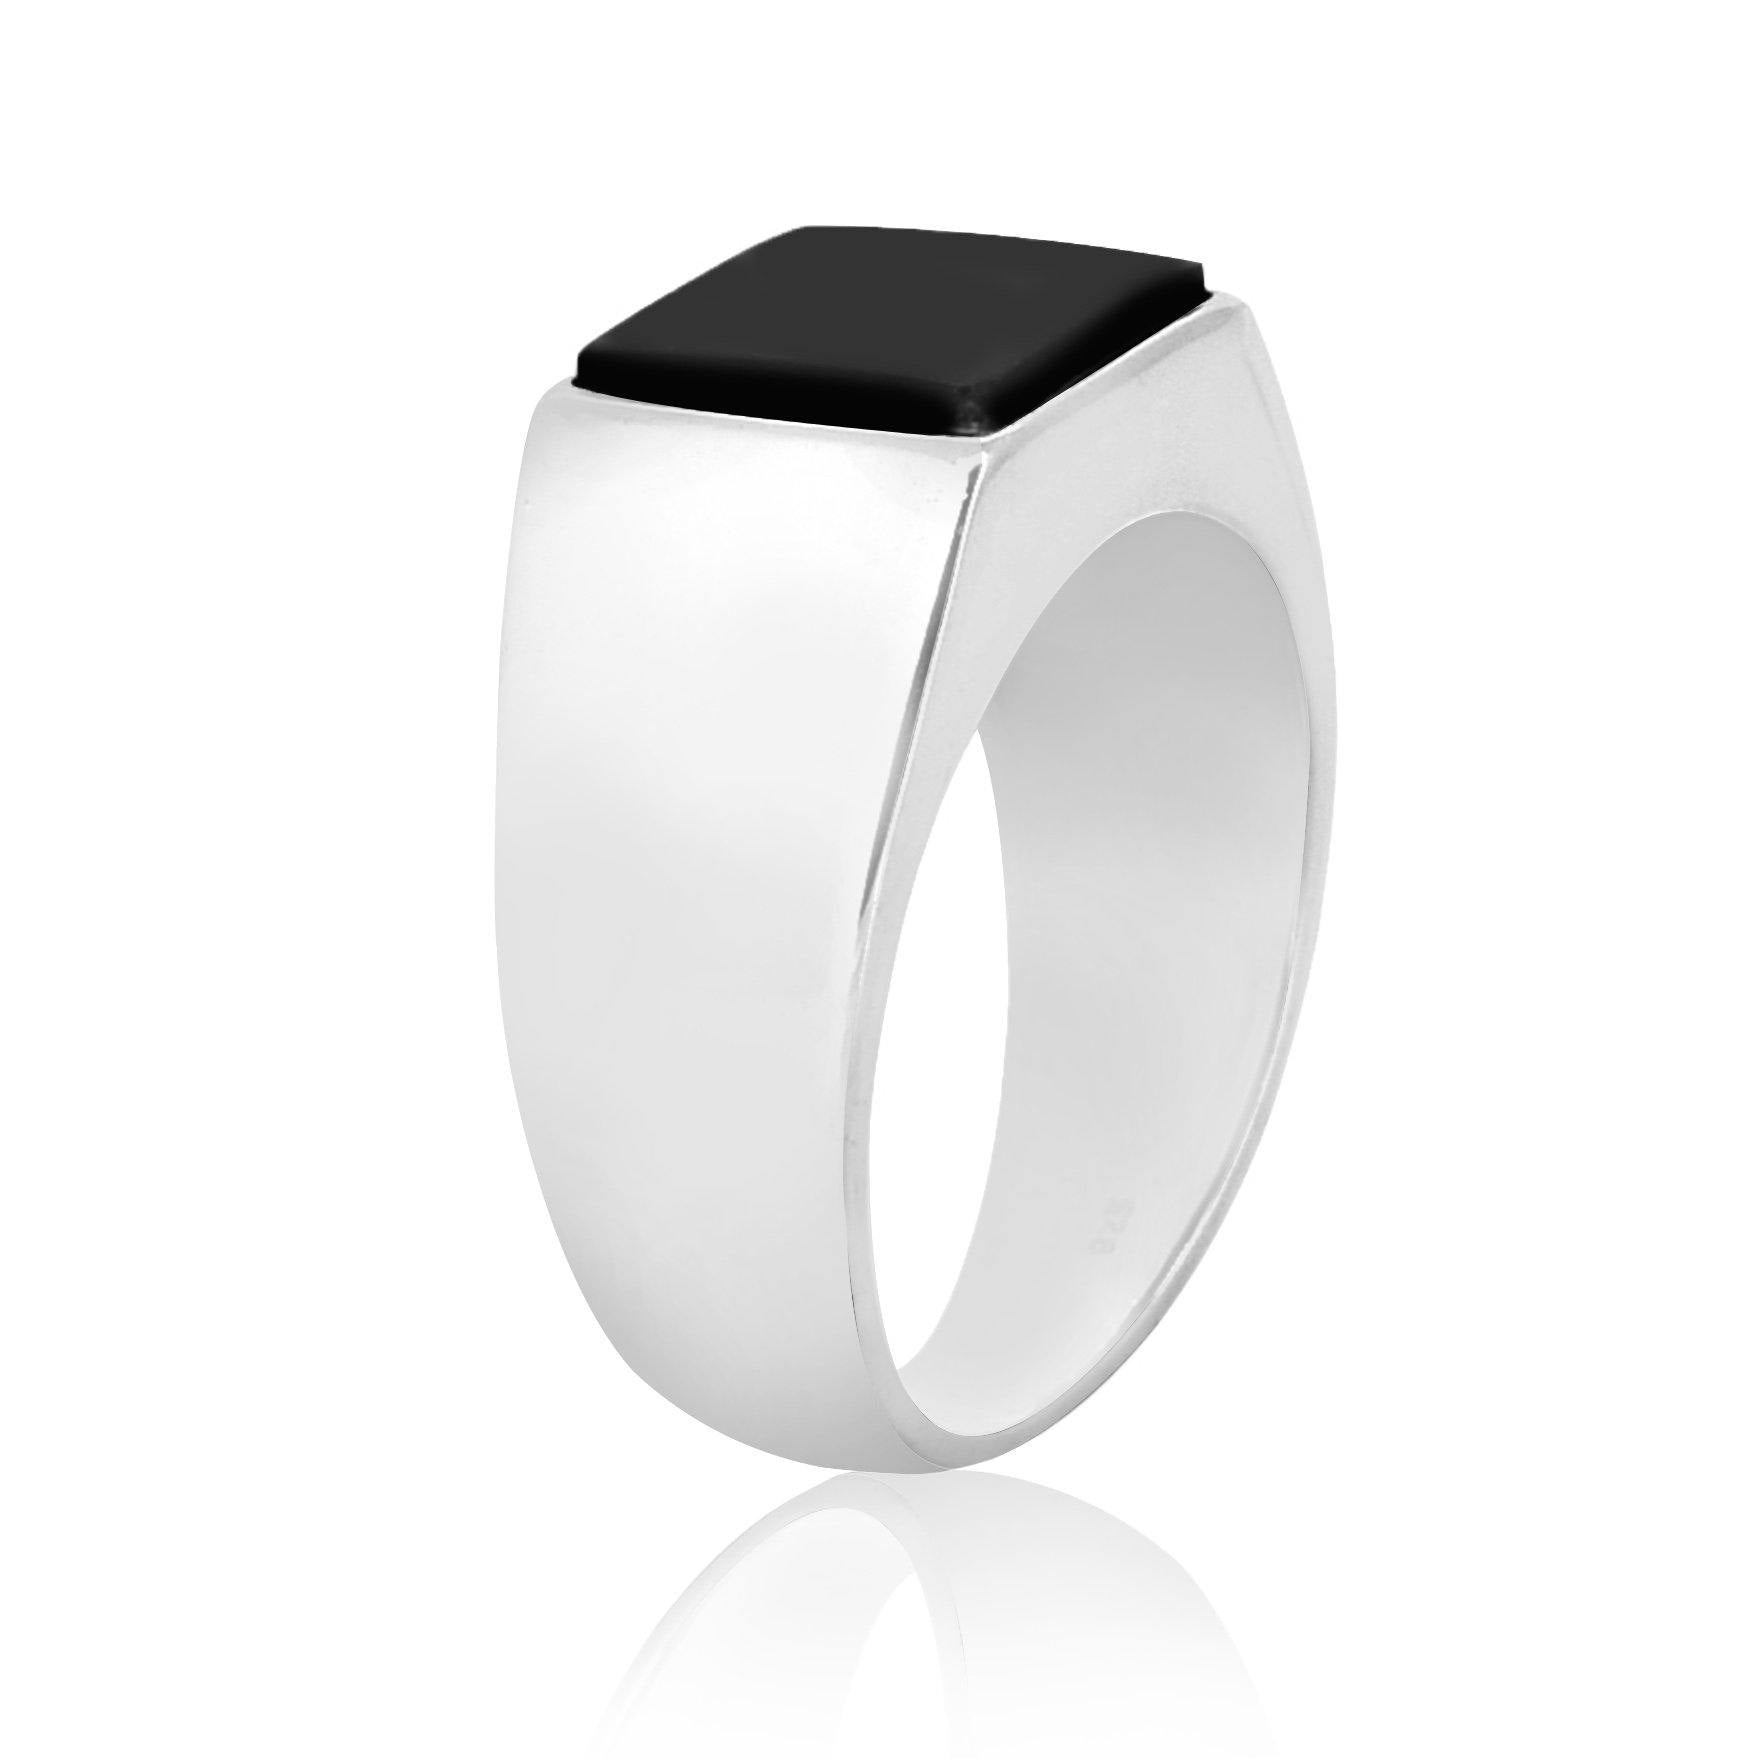 Black Onyx Solid 925 Sterling Silver Ring For Men's Jewelry - YoTreasure